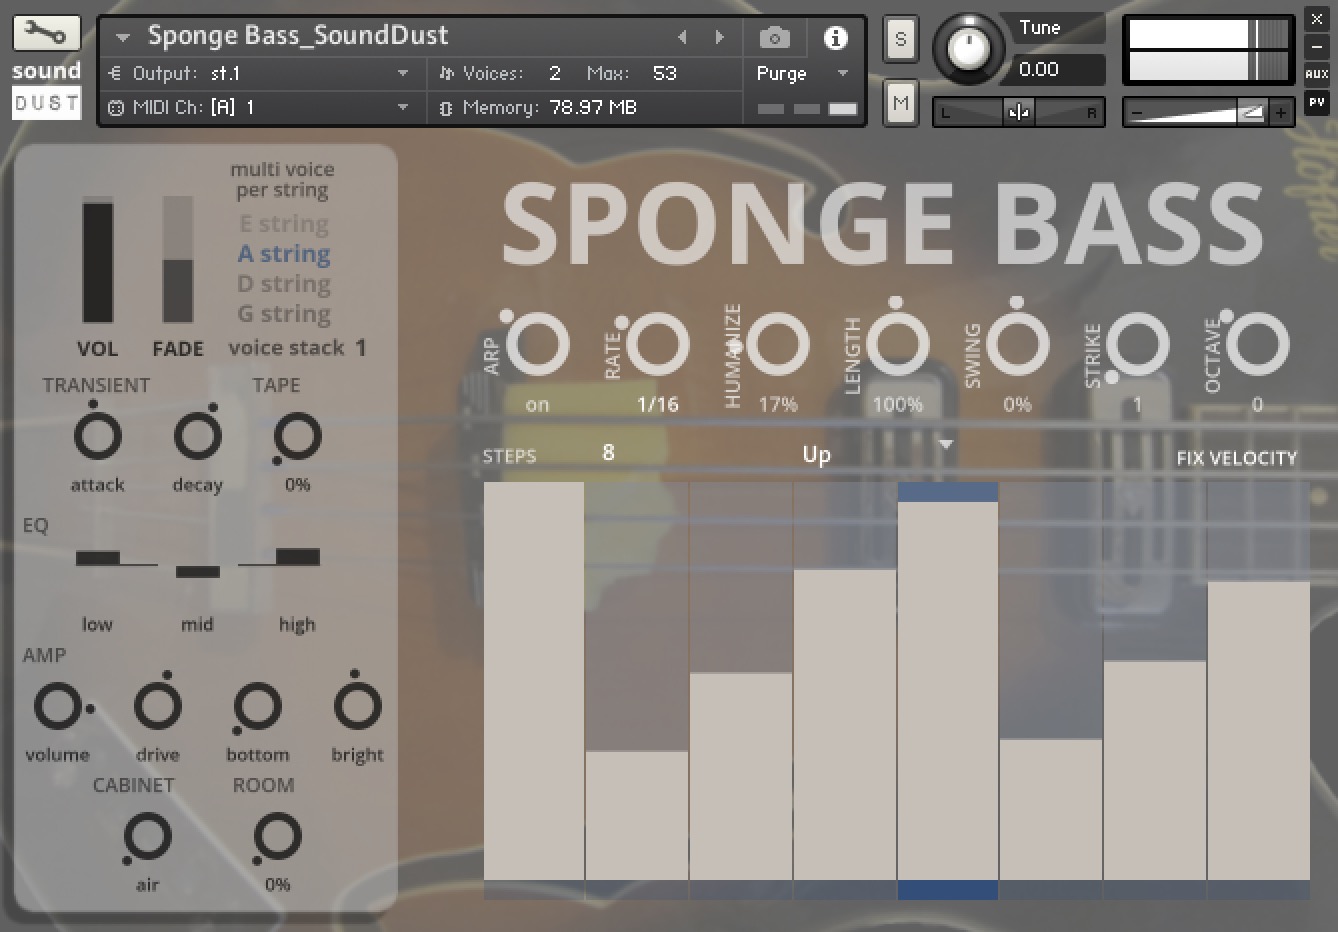 Sponge Bass by Sound Dust Review